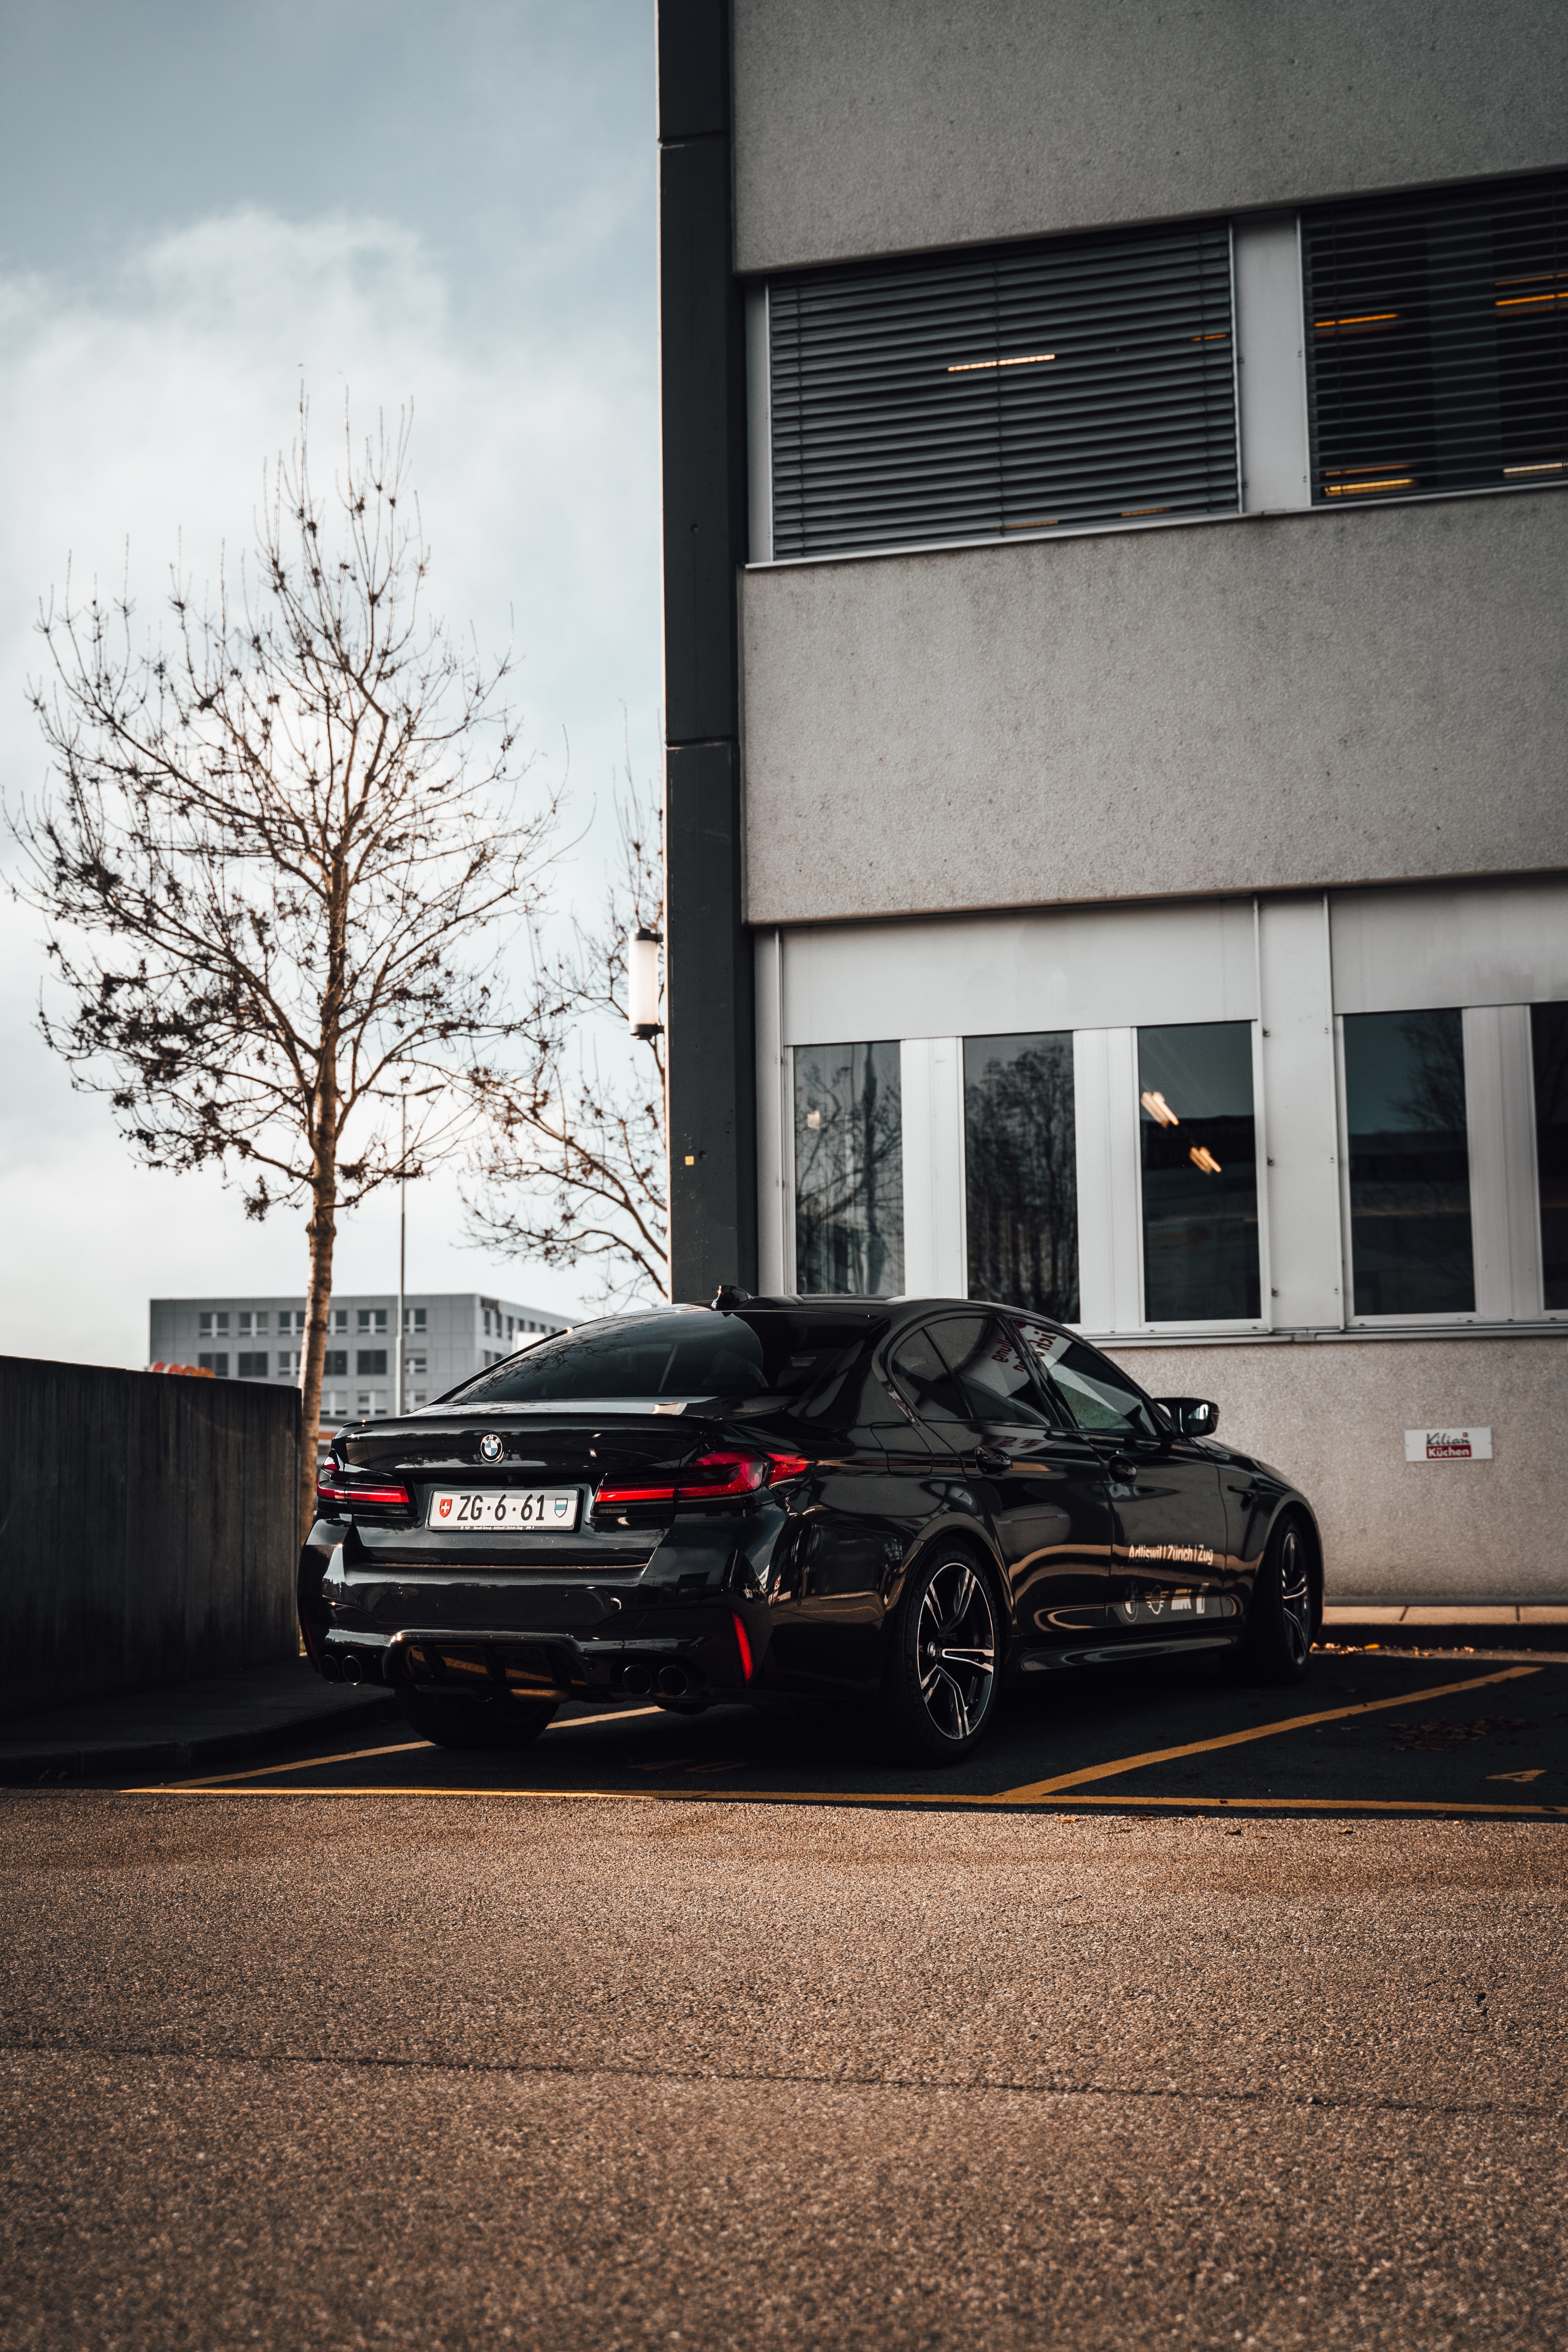 bmw, black, car, cars, side view, parking Aesthetic wallpaper